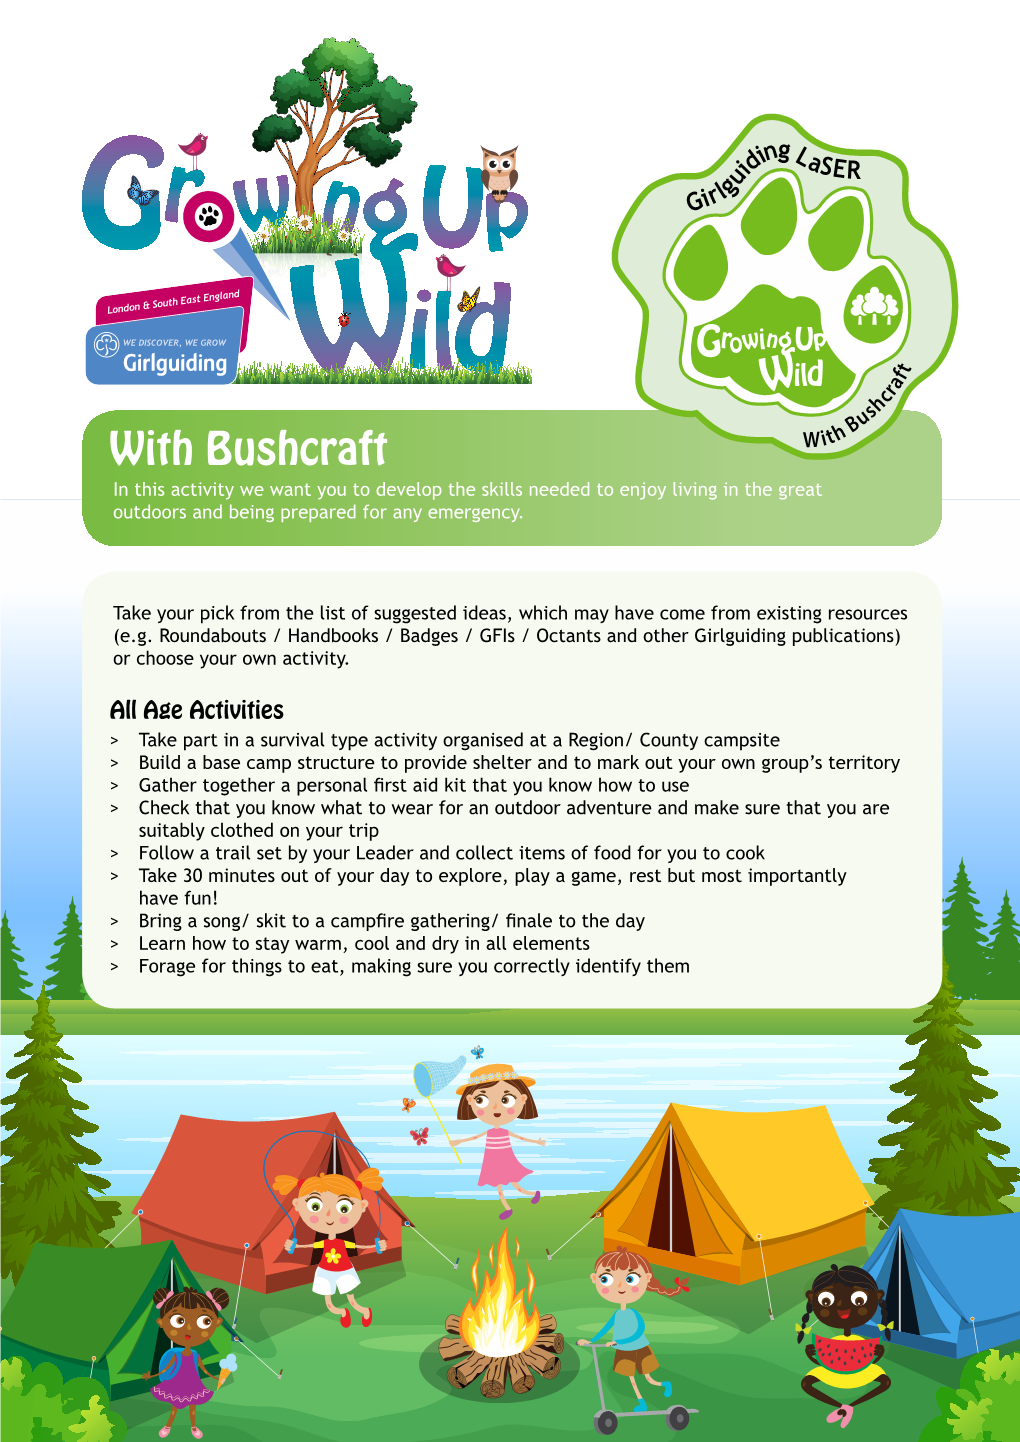 With Bushcraft Wit in This Activity We Want You to Develop the Skills Needed to Enjoy Living in the Great Outdoors and Being Prepared for Any Emergency